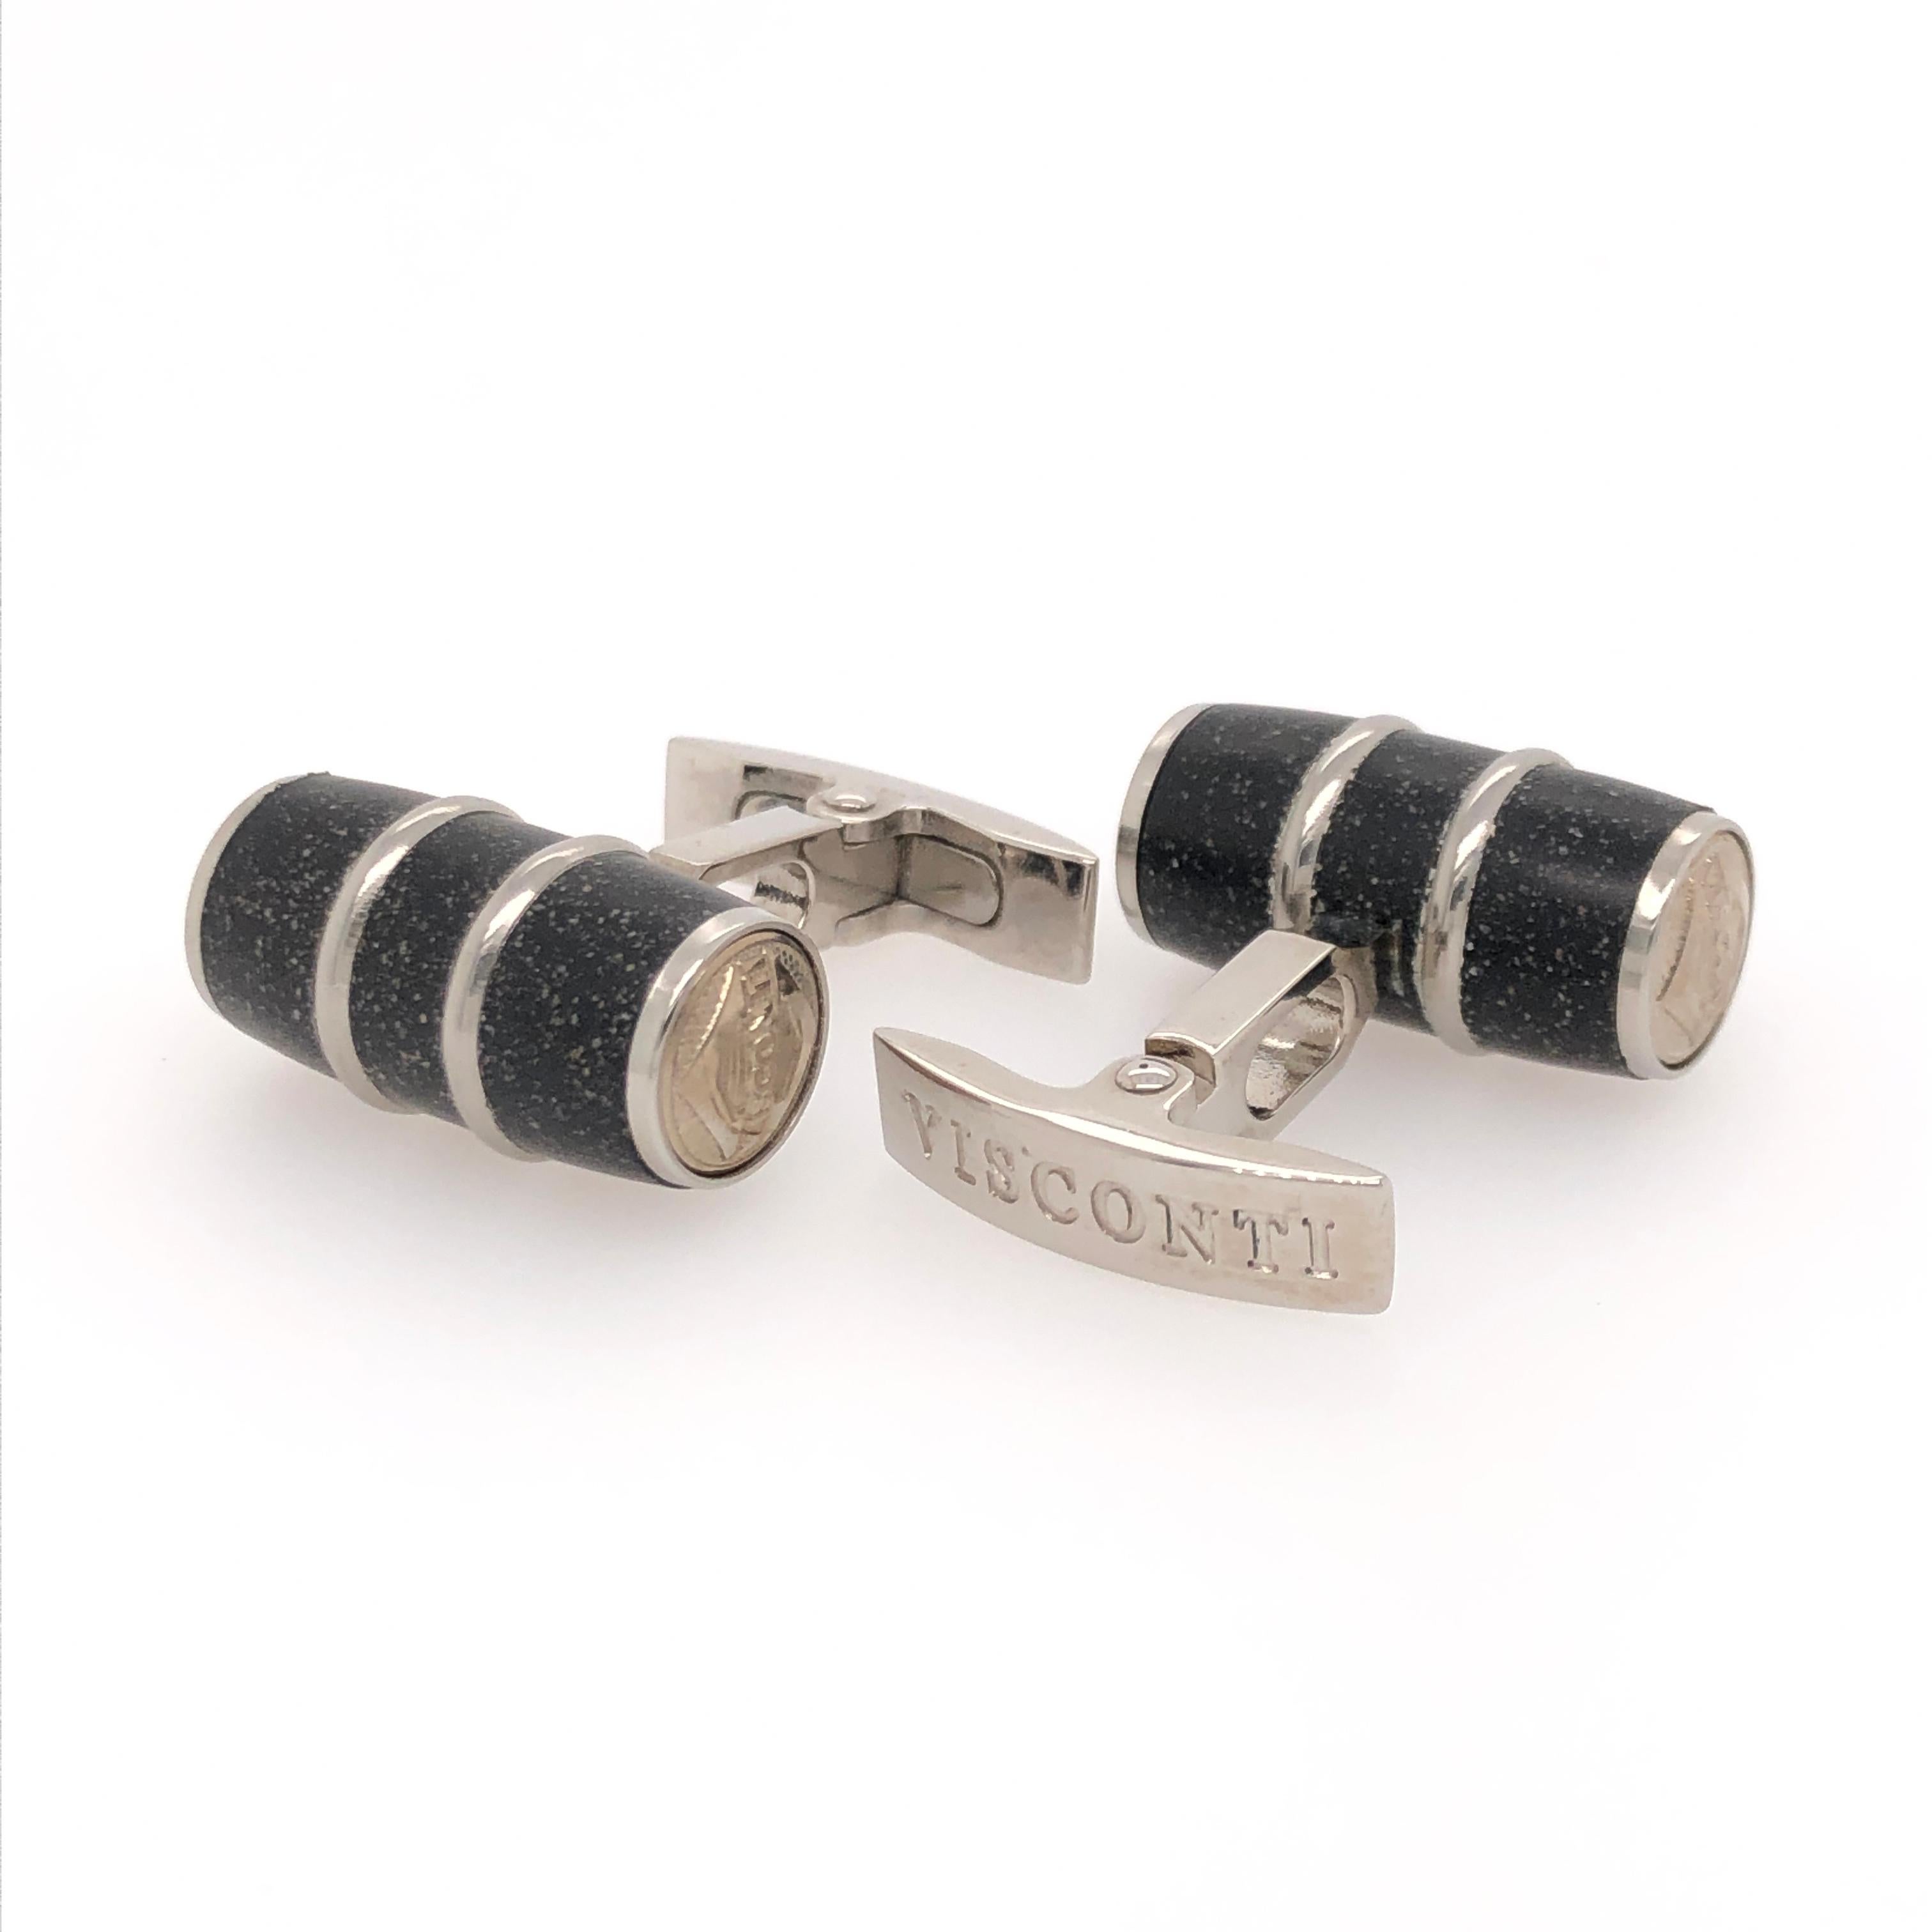 These simple barrel shaped steel cufflinks from Visconti are for everyday wear. Black and steel are a classic combination that increases the cufflinks' versatility. 
  